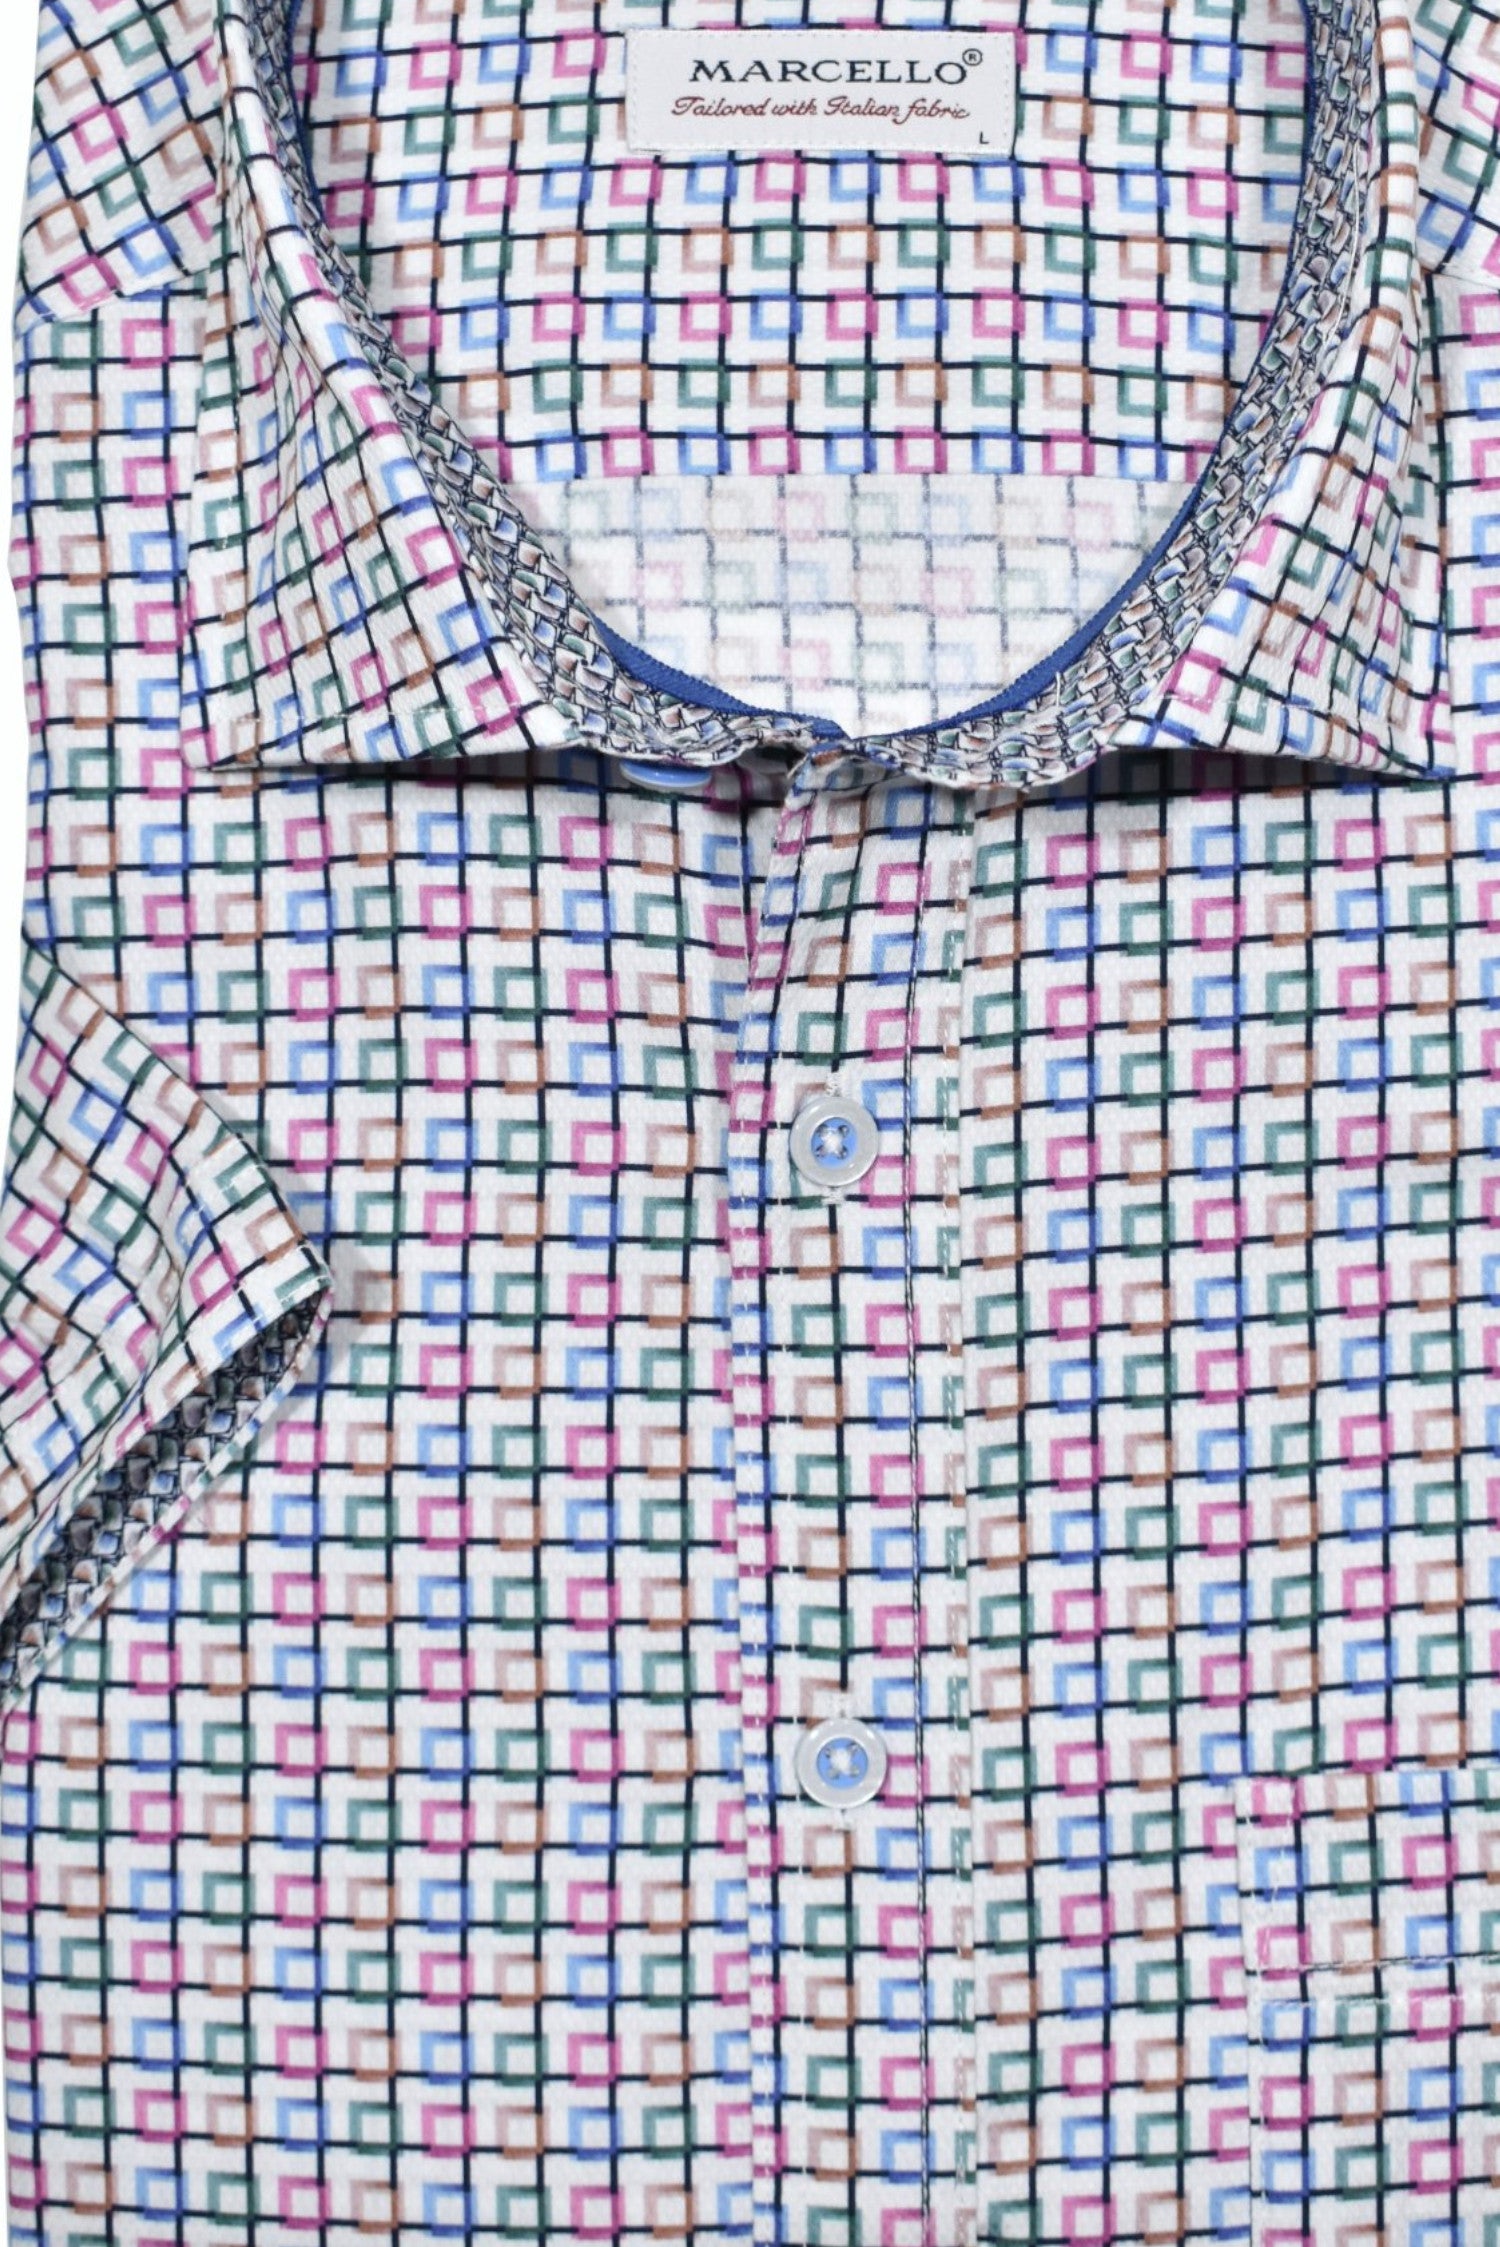 Luxurious cotton fabric, eye-catching open square pattern in beautiful gem hue colors. Elegant style ideal for any event. Short sleeve Marcello Shirt.